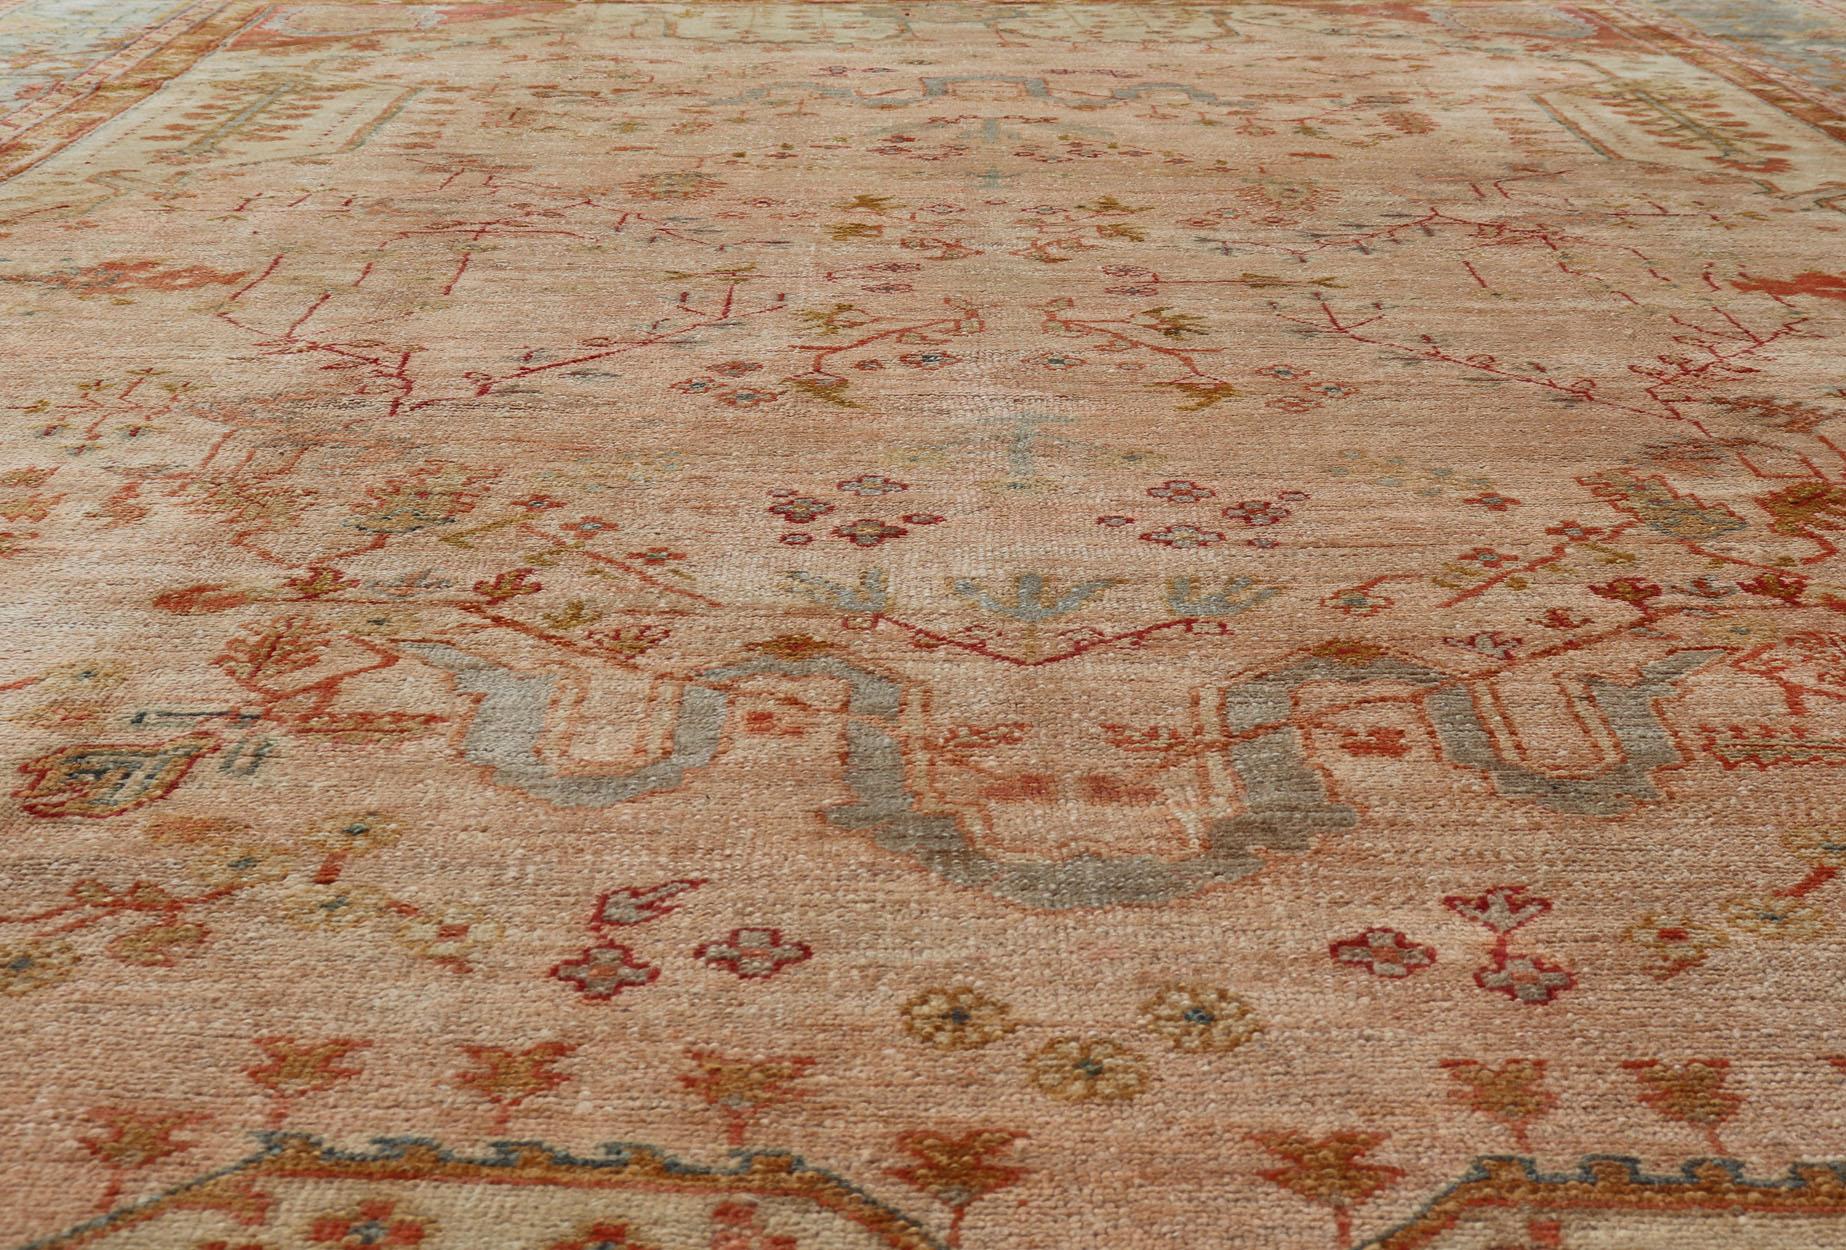 Antique Turkish Large Oushak Colorful Rug in Salmon, Green, Yellow, Orange In Good Condition For Sale In Atlanta, GA